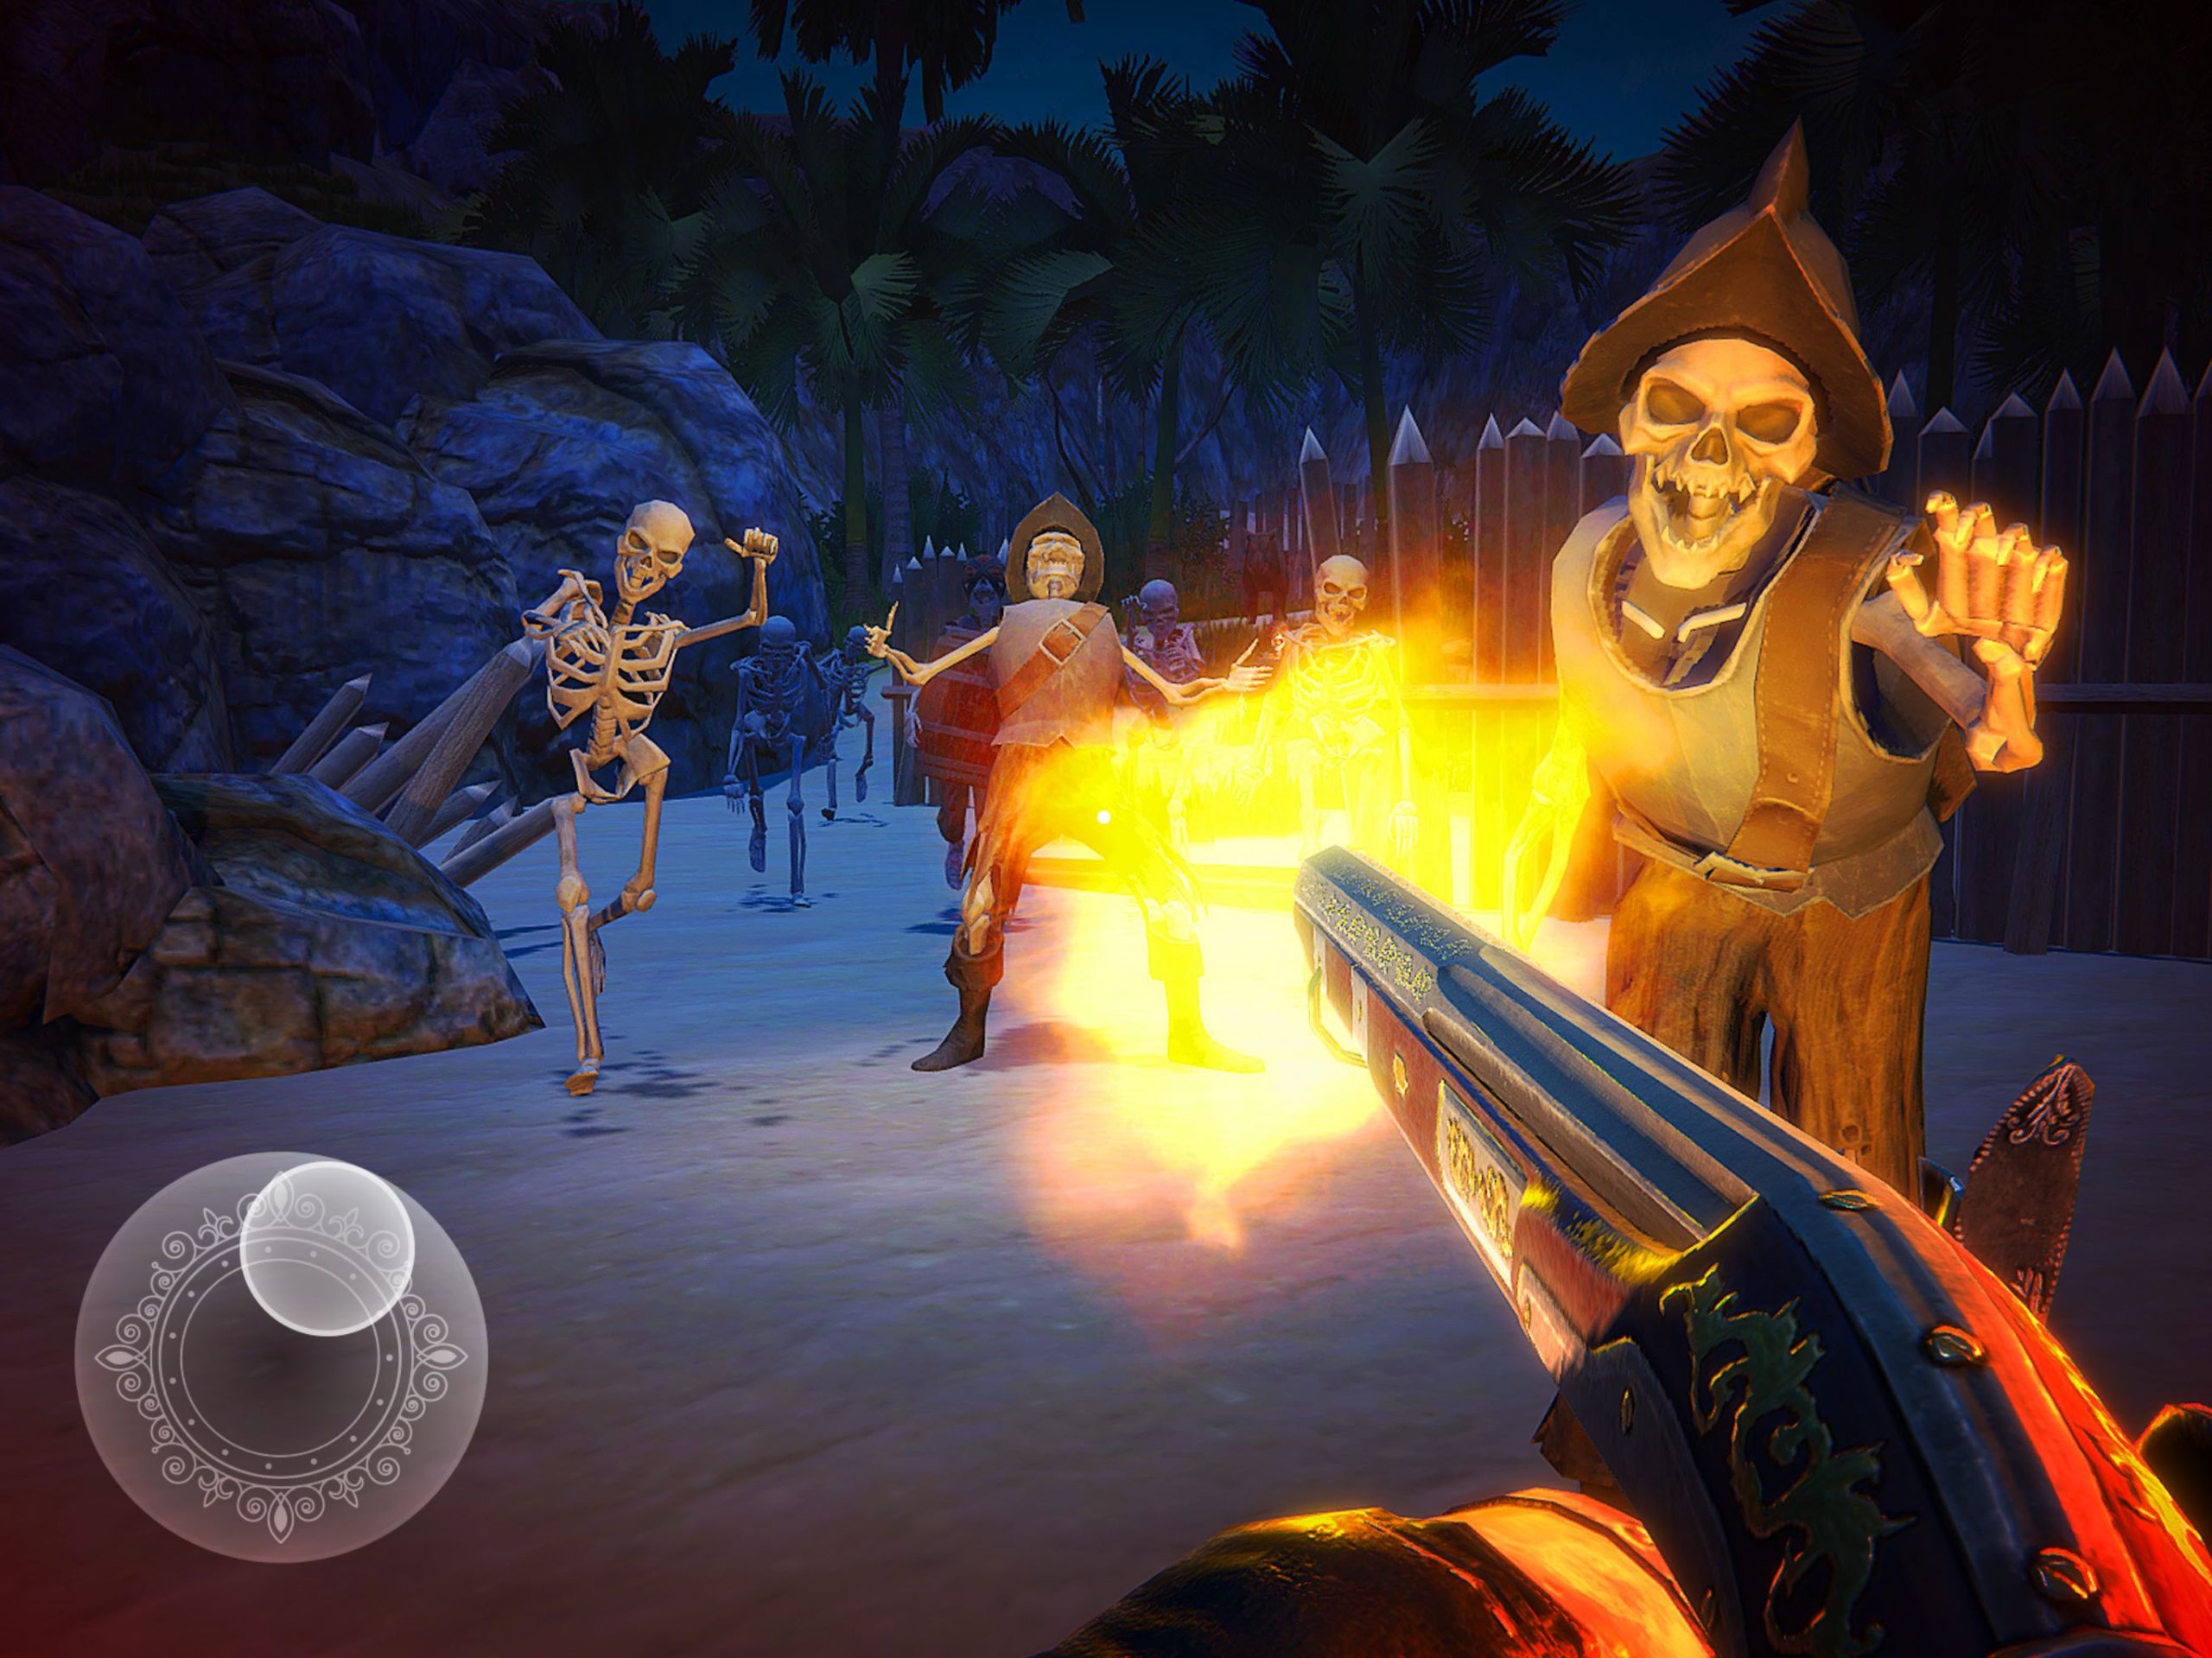 Last Pirate: Survival Island is a Slick First-Person Survival Sim